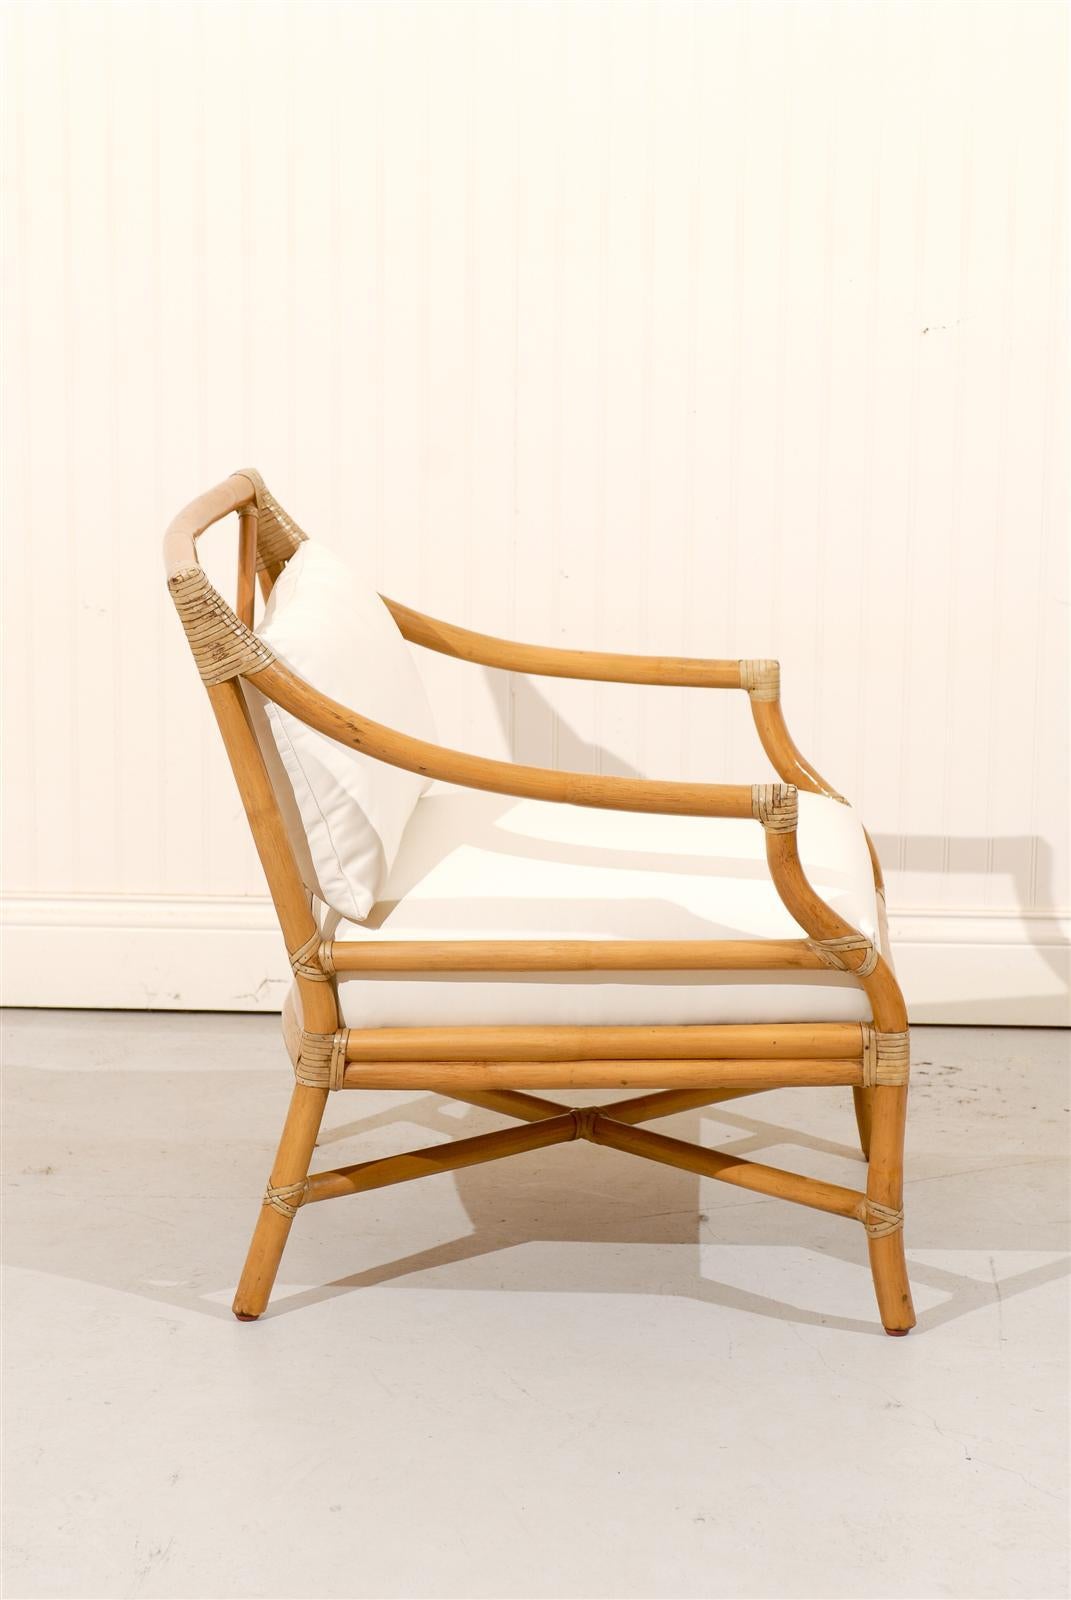 mcguire bamboo chairs